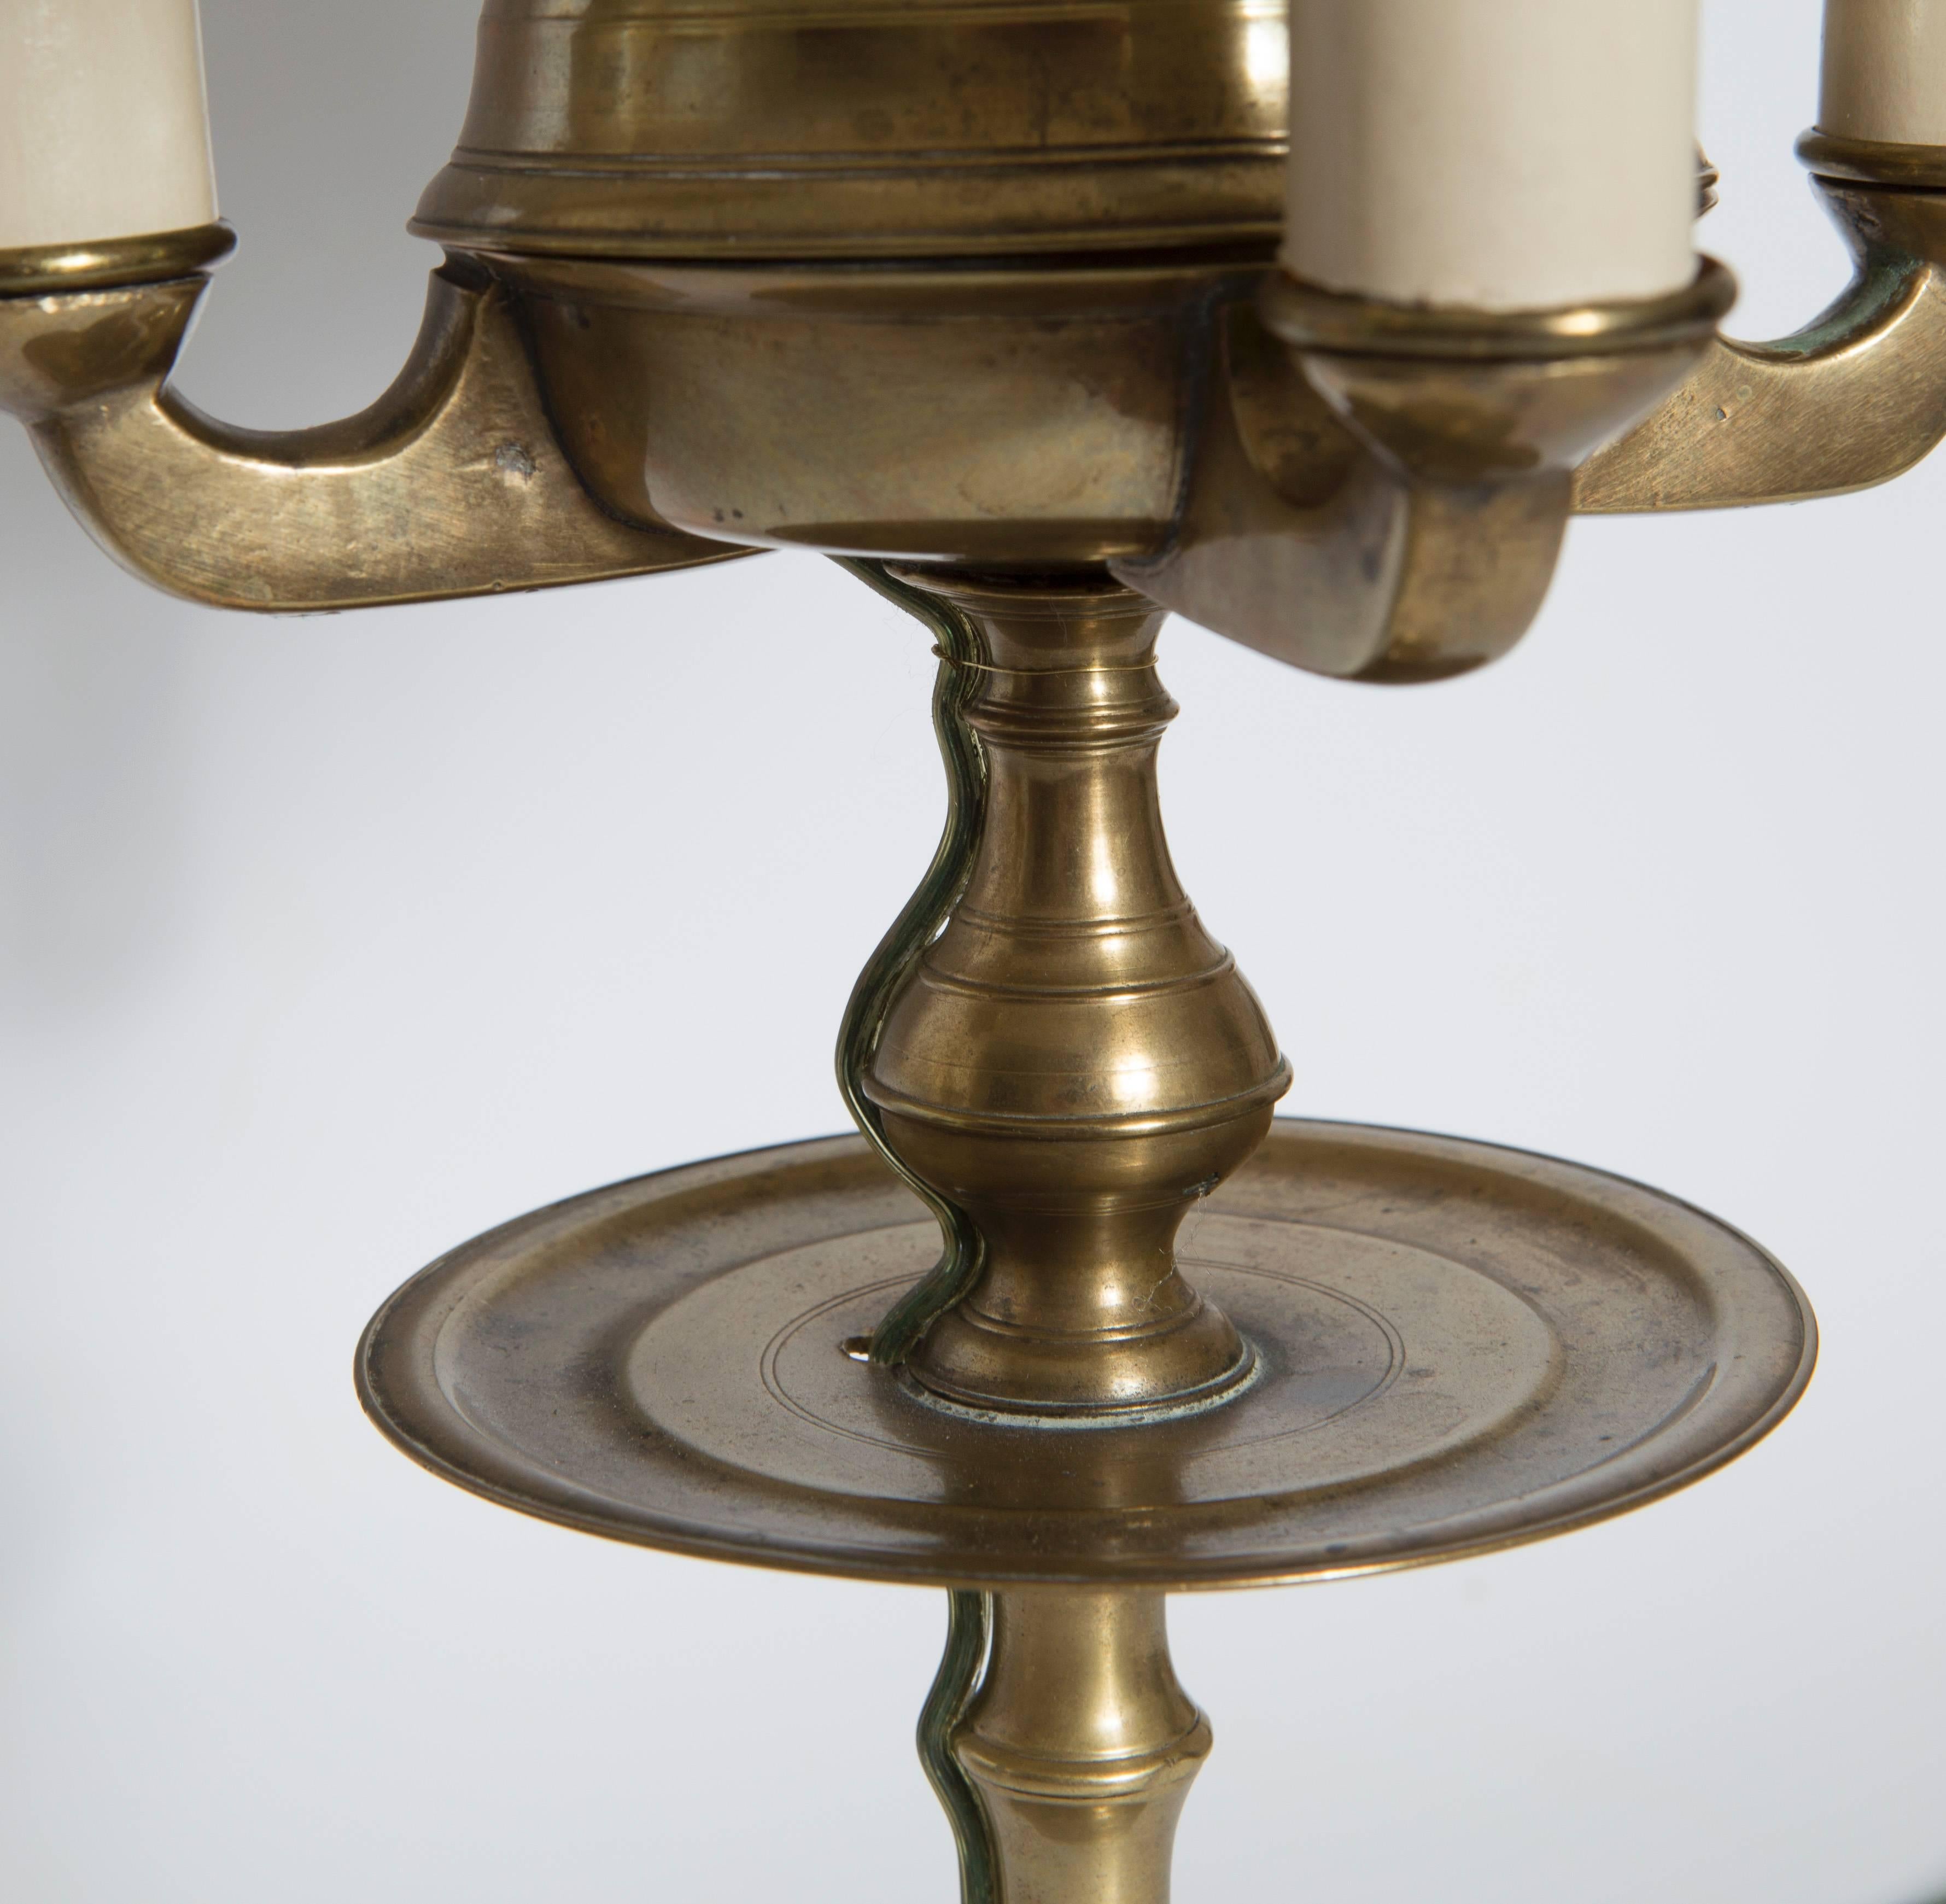 19th Century Brass Candelabra Lamp with Shade  In Good Condition For Sale In Nashville, TN